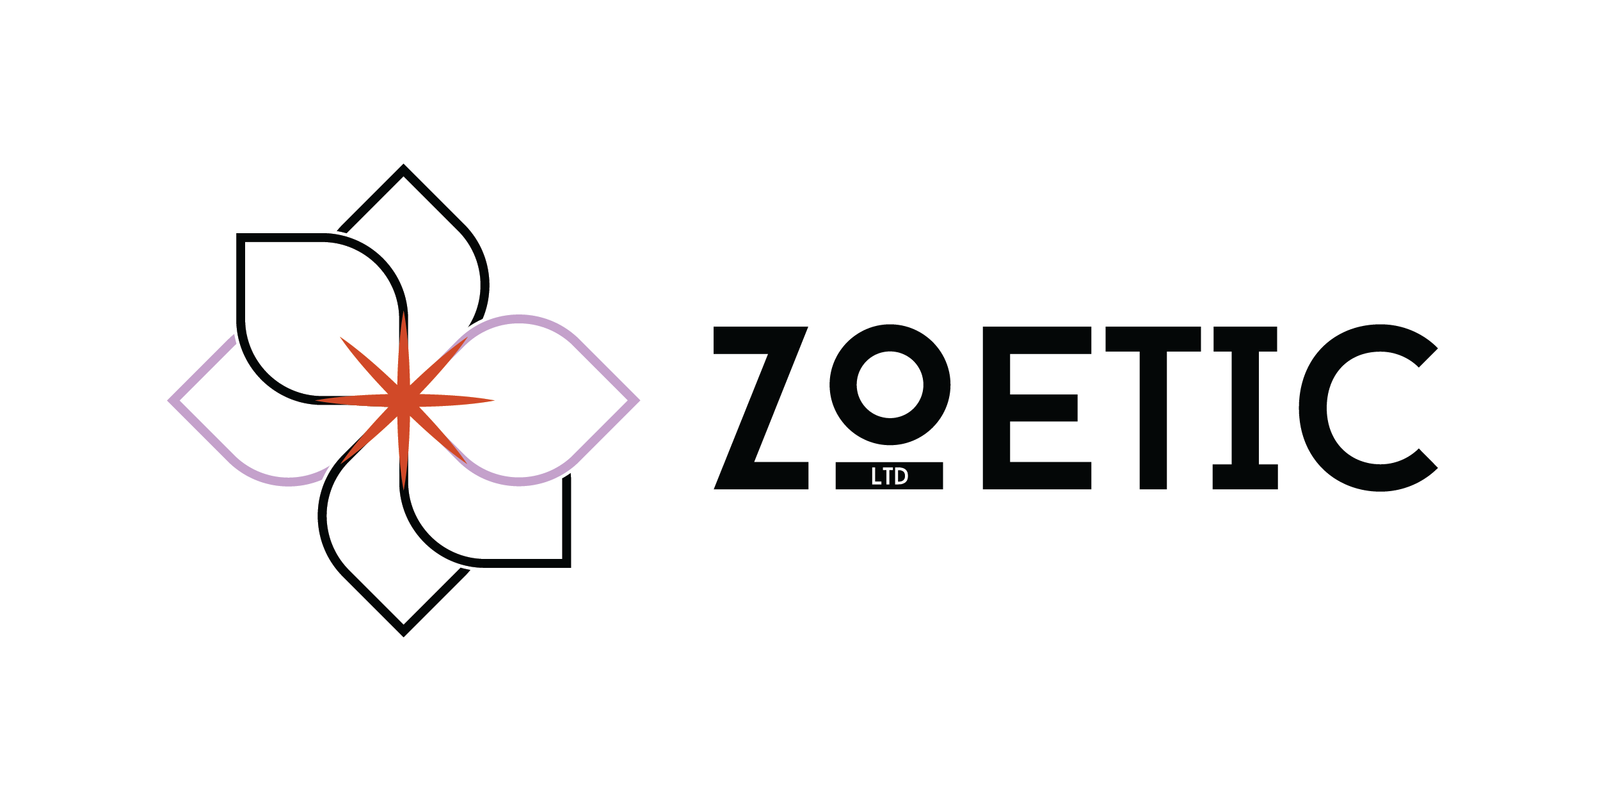 Zoetic Ltd - Company Logo - Especially good when used in cooking seafood dishes such as paella.